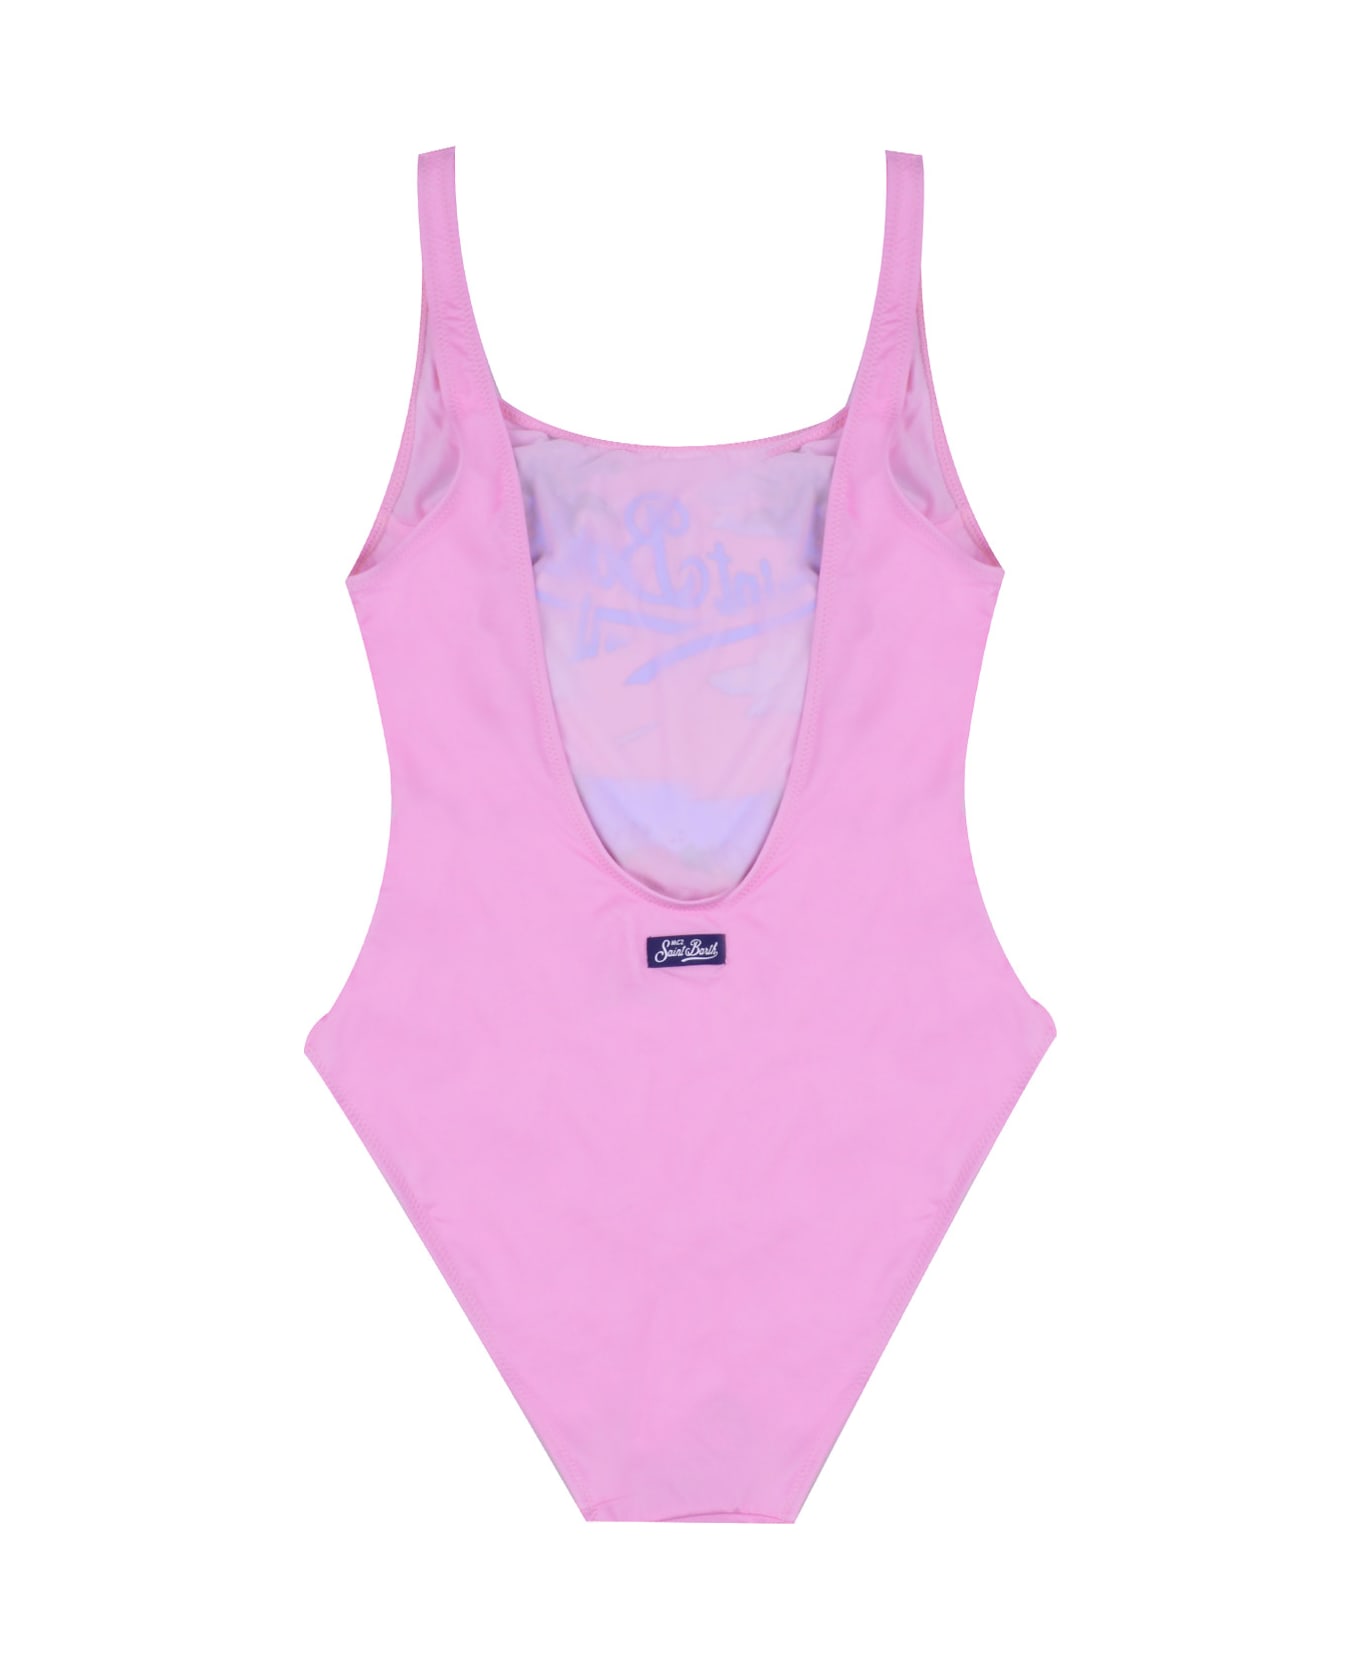 MC2 Saint Barth One Piece Swimsuit With Floreal Print - Rose